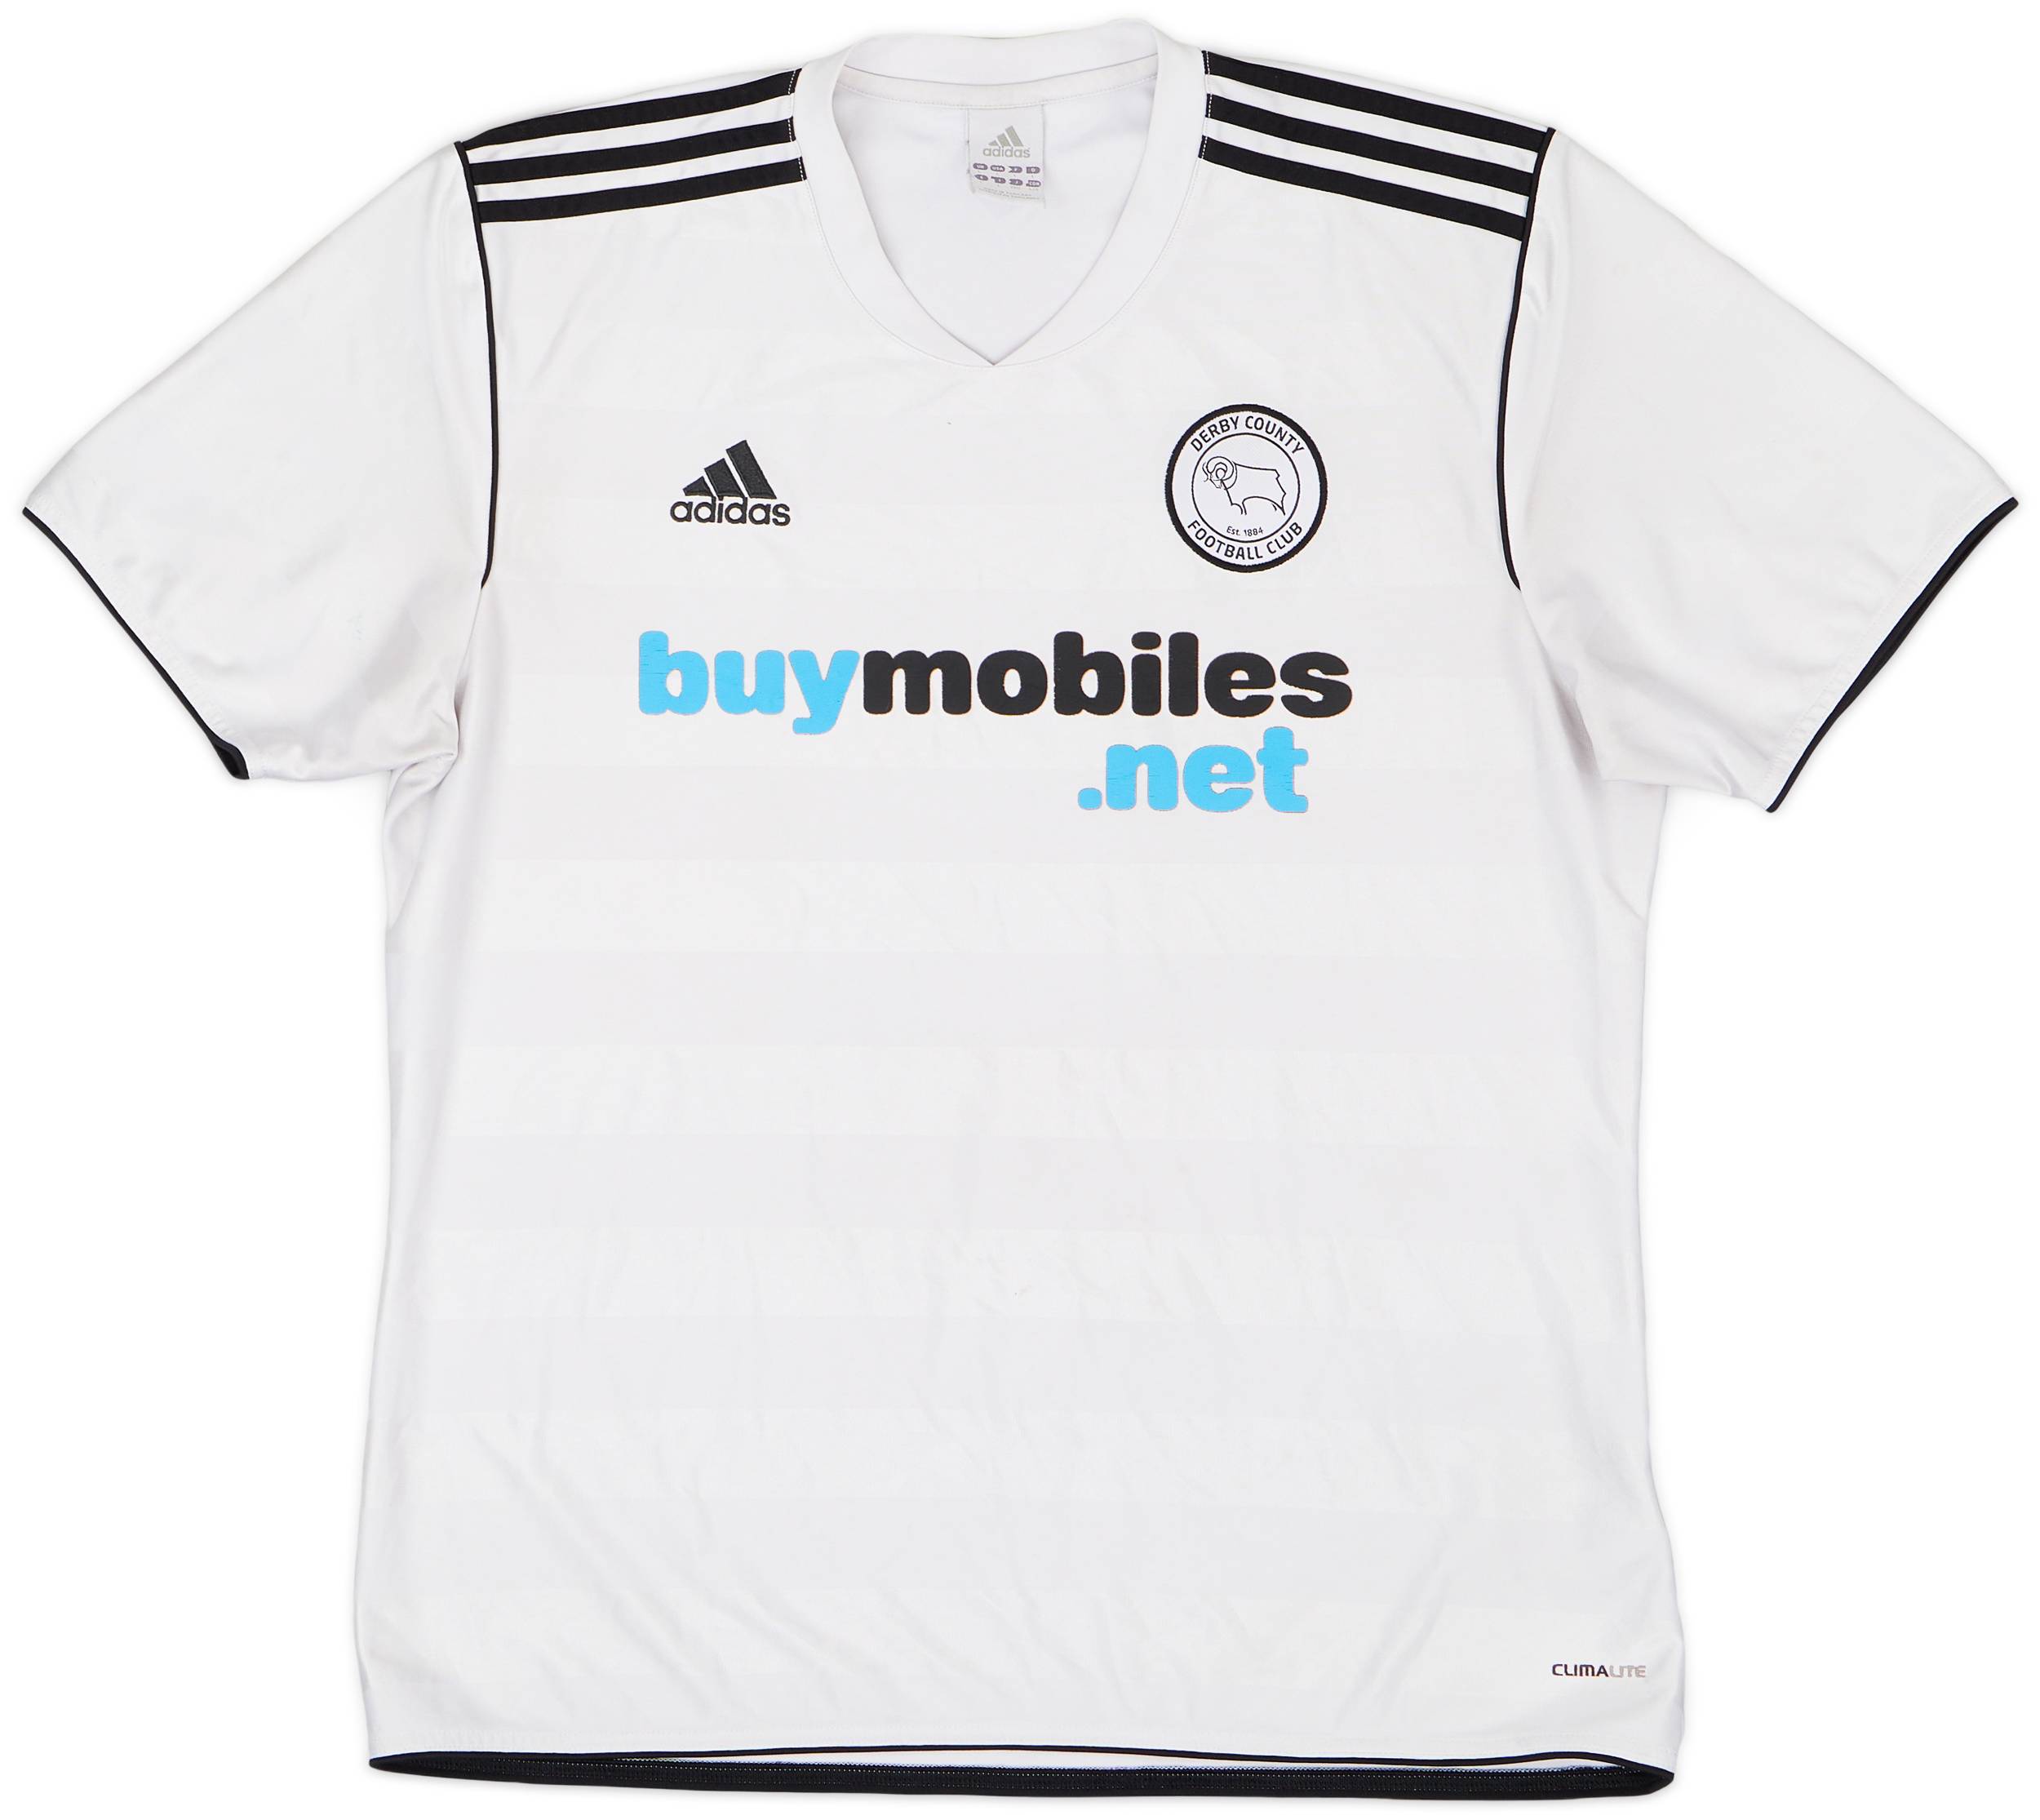 2010-11 Derby County Home Shirt - 7/10 - (L)